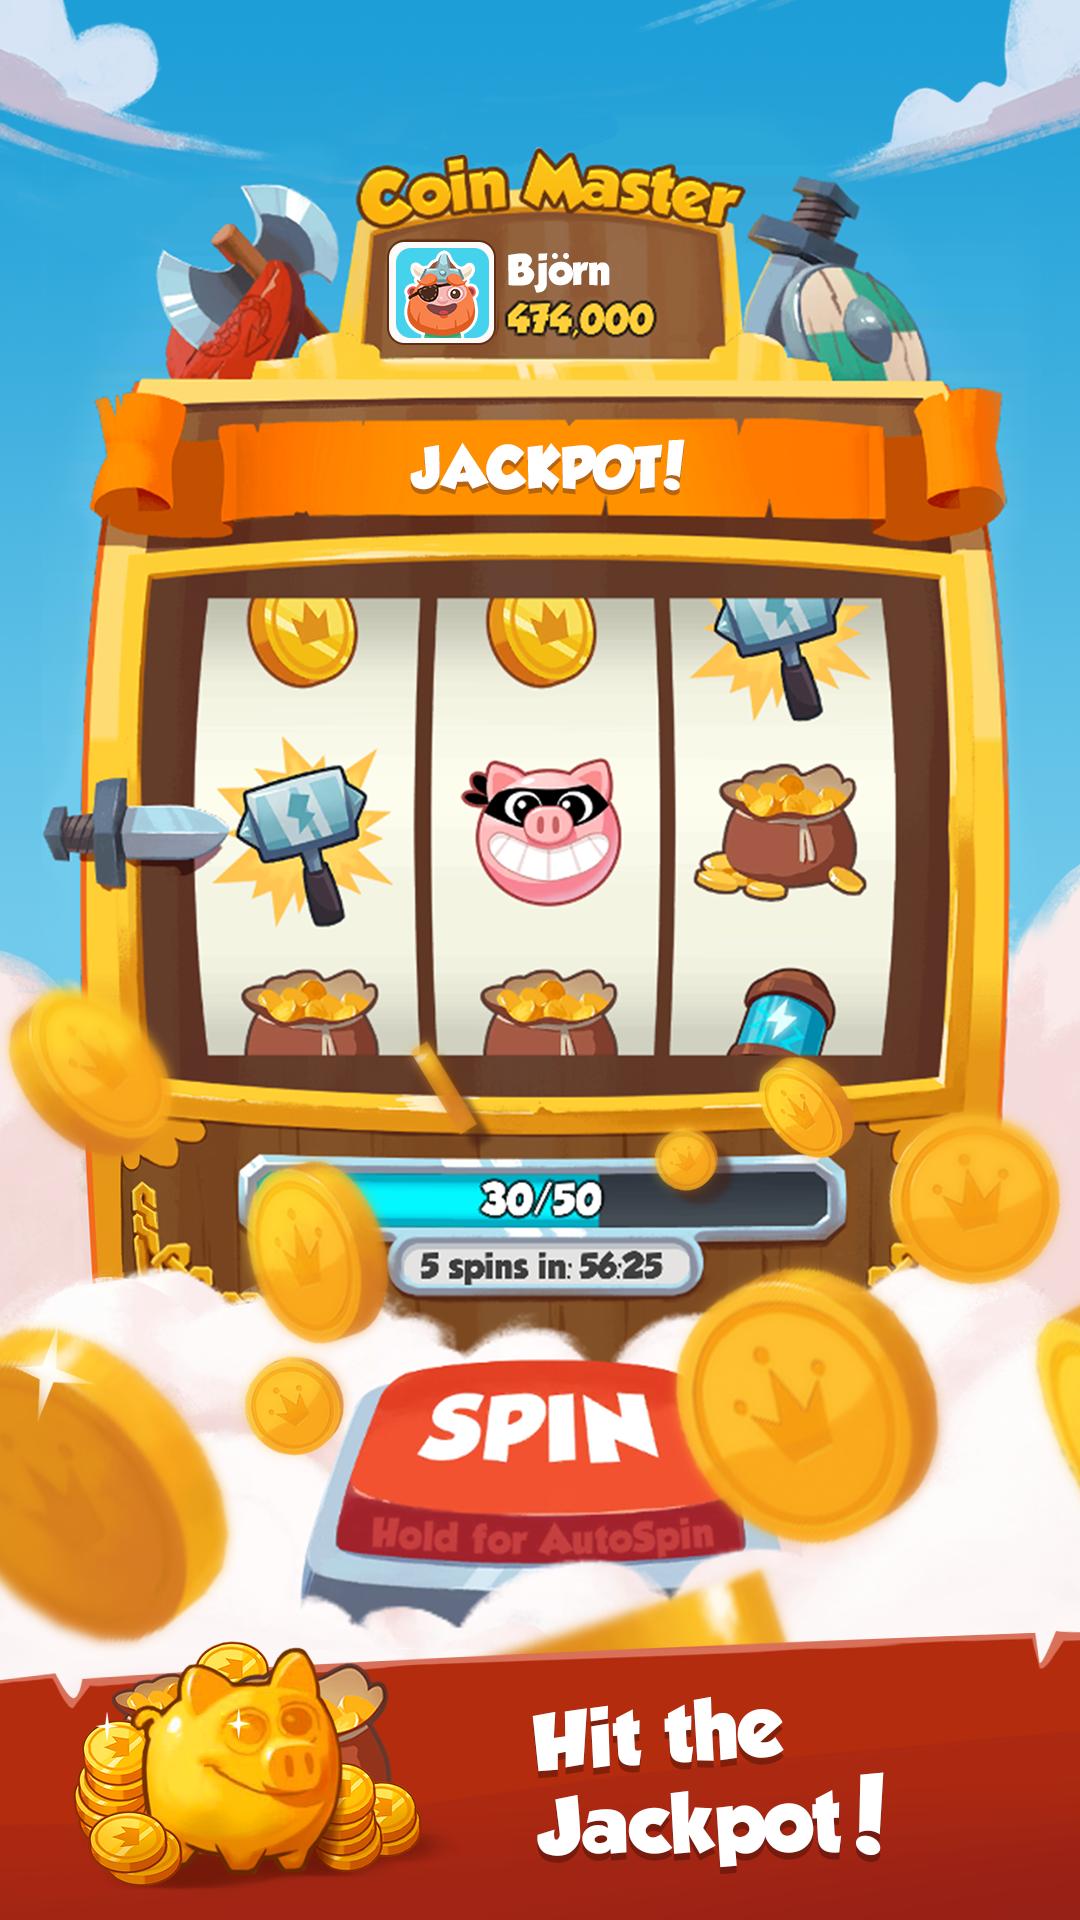 How to coin master free spin